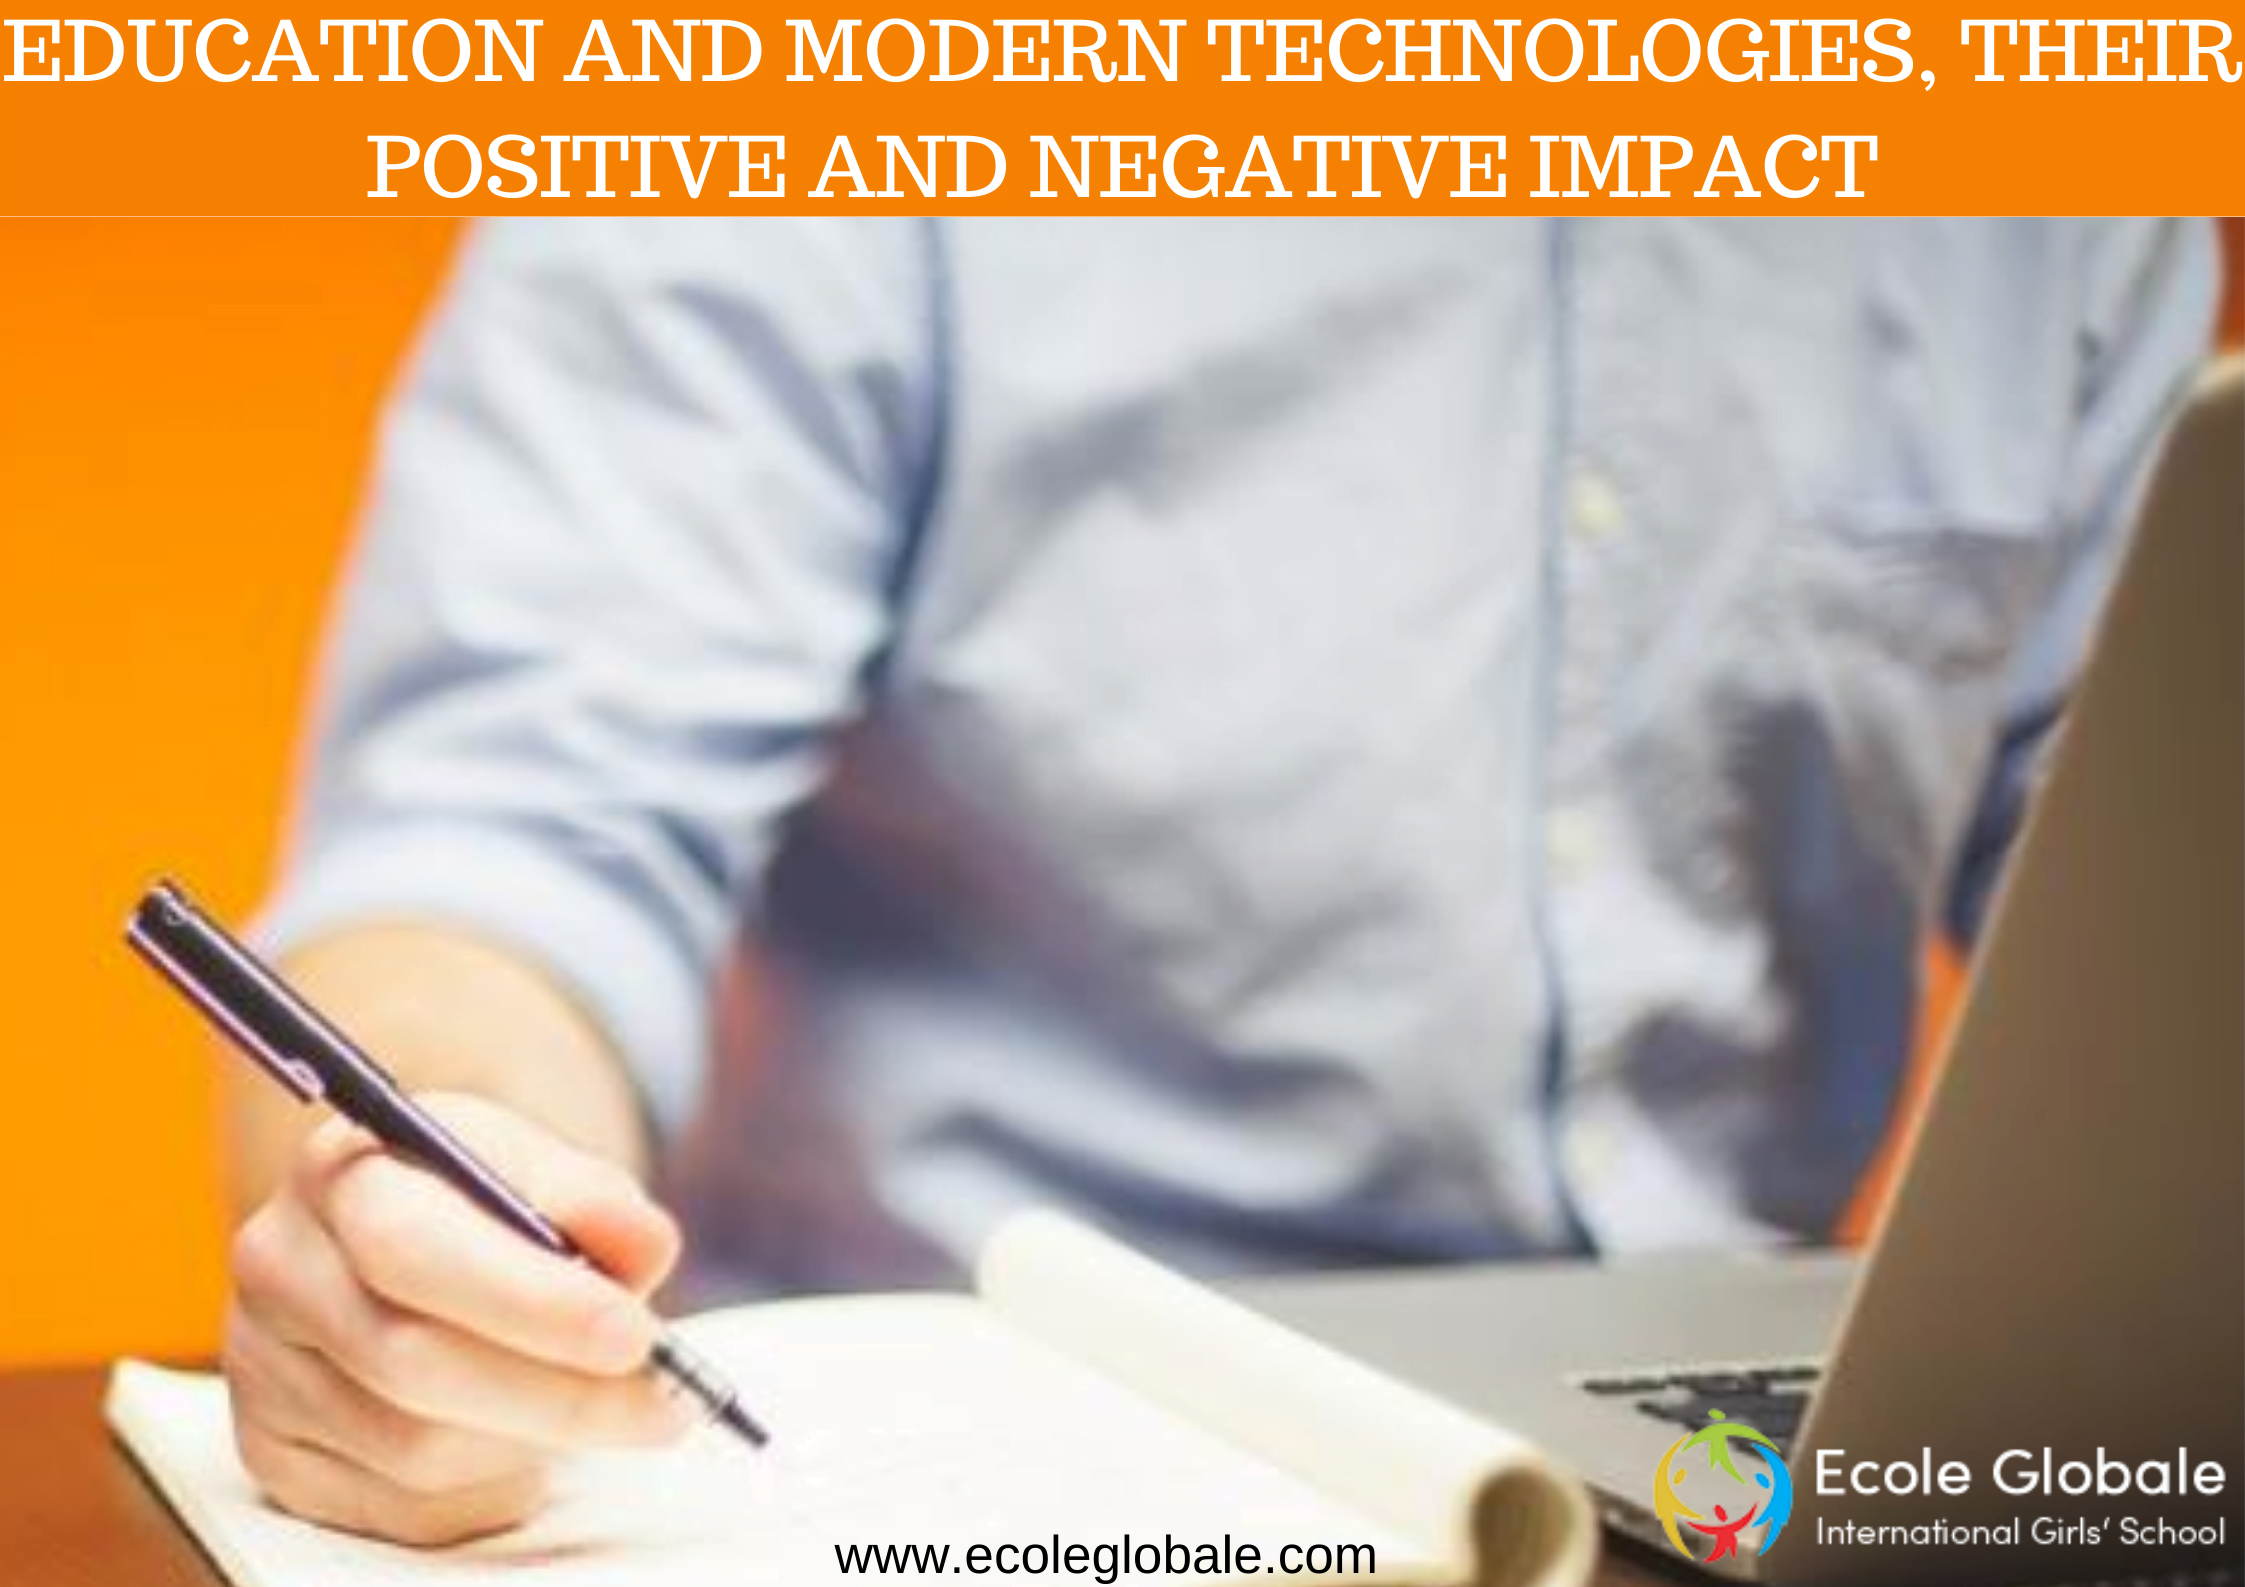 EDUCATION AND MODERN TECHNOLOGIES, THEIR POSITIVE AND NEGATIVE IMPACT